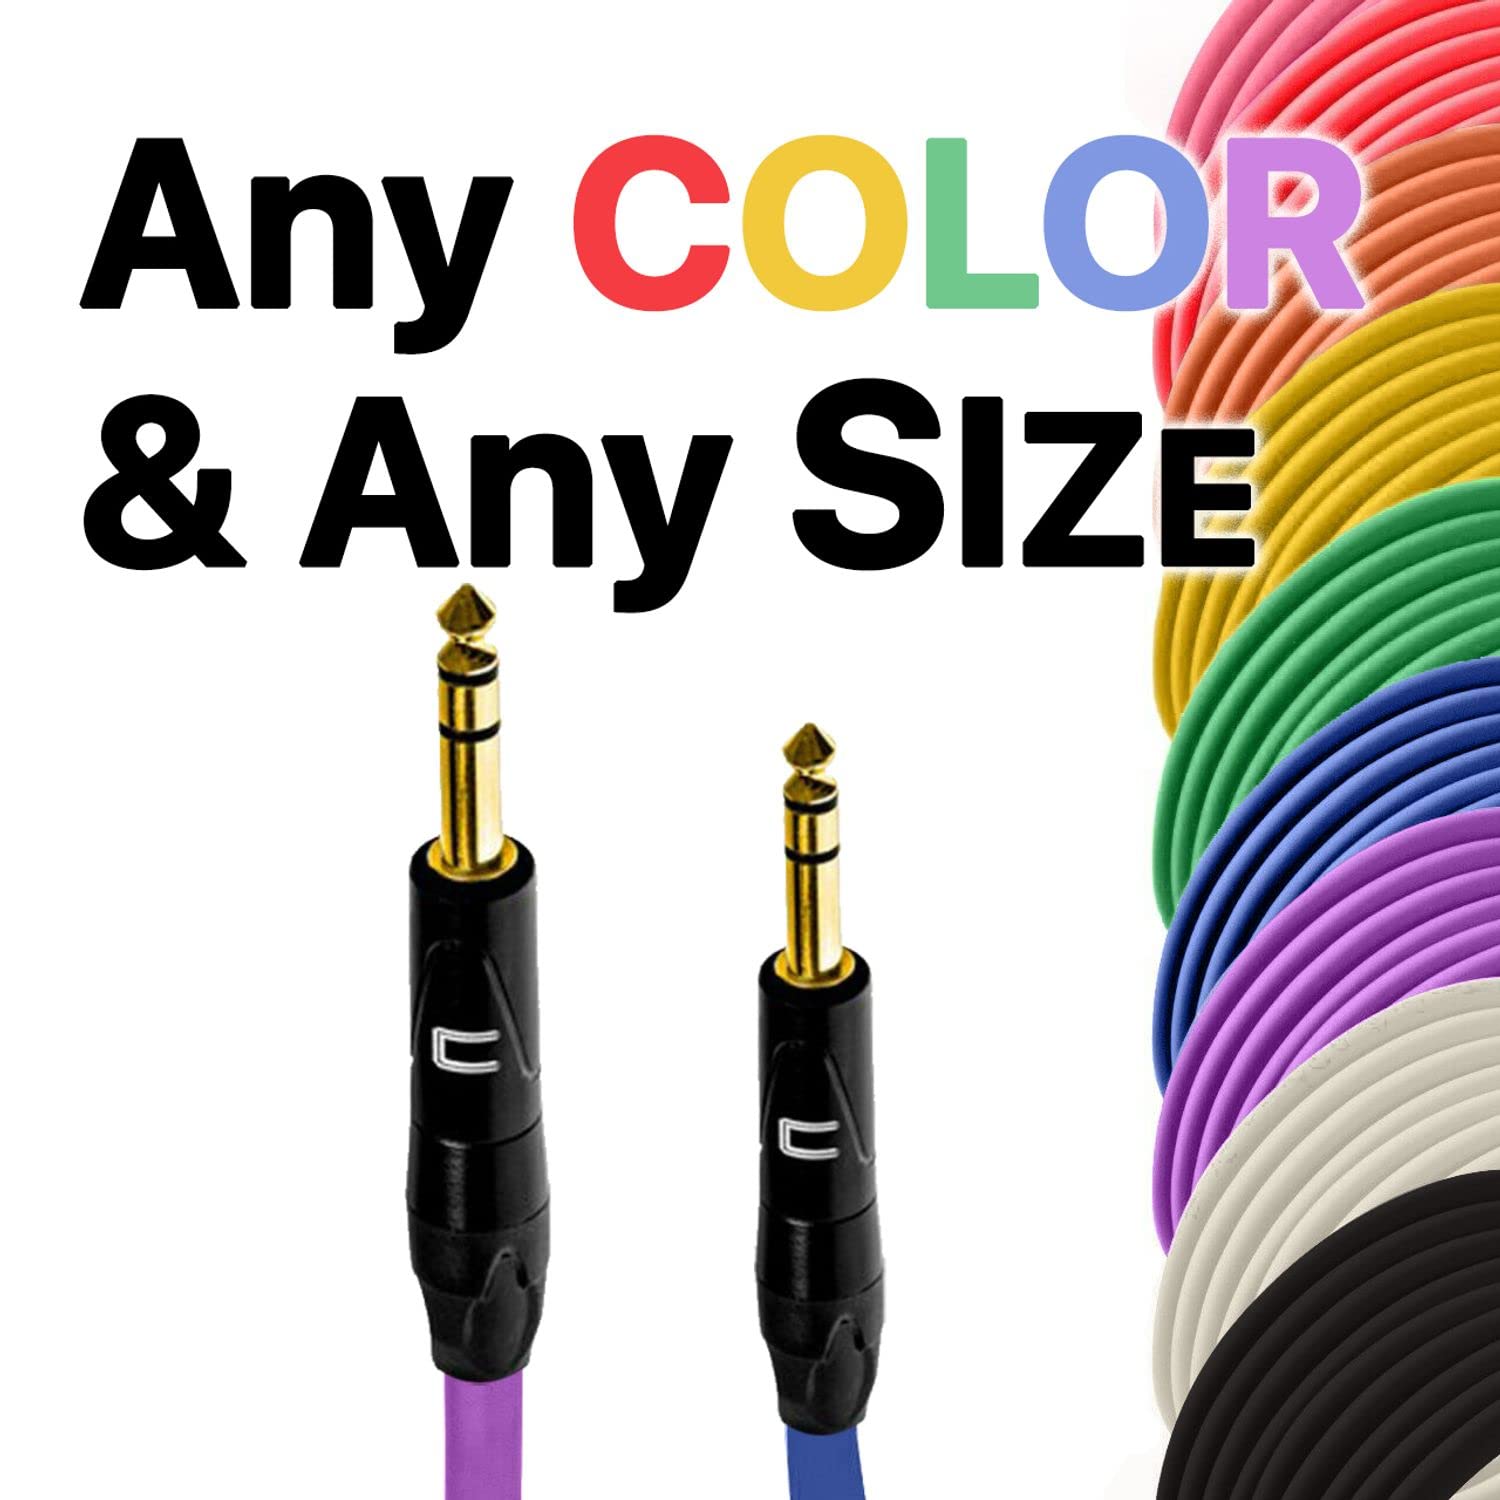 COLUBER CABLE 1/4 TRS Male to 1/4" TRS Male - 0.5 Feet - Black - 1/4 (6.35mm) Stereo Balanced Male to Male Connector for Powered Speakers, Audio Interface or Mixer for Live Performance & Recording  - Very Good